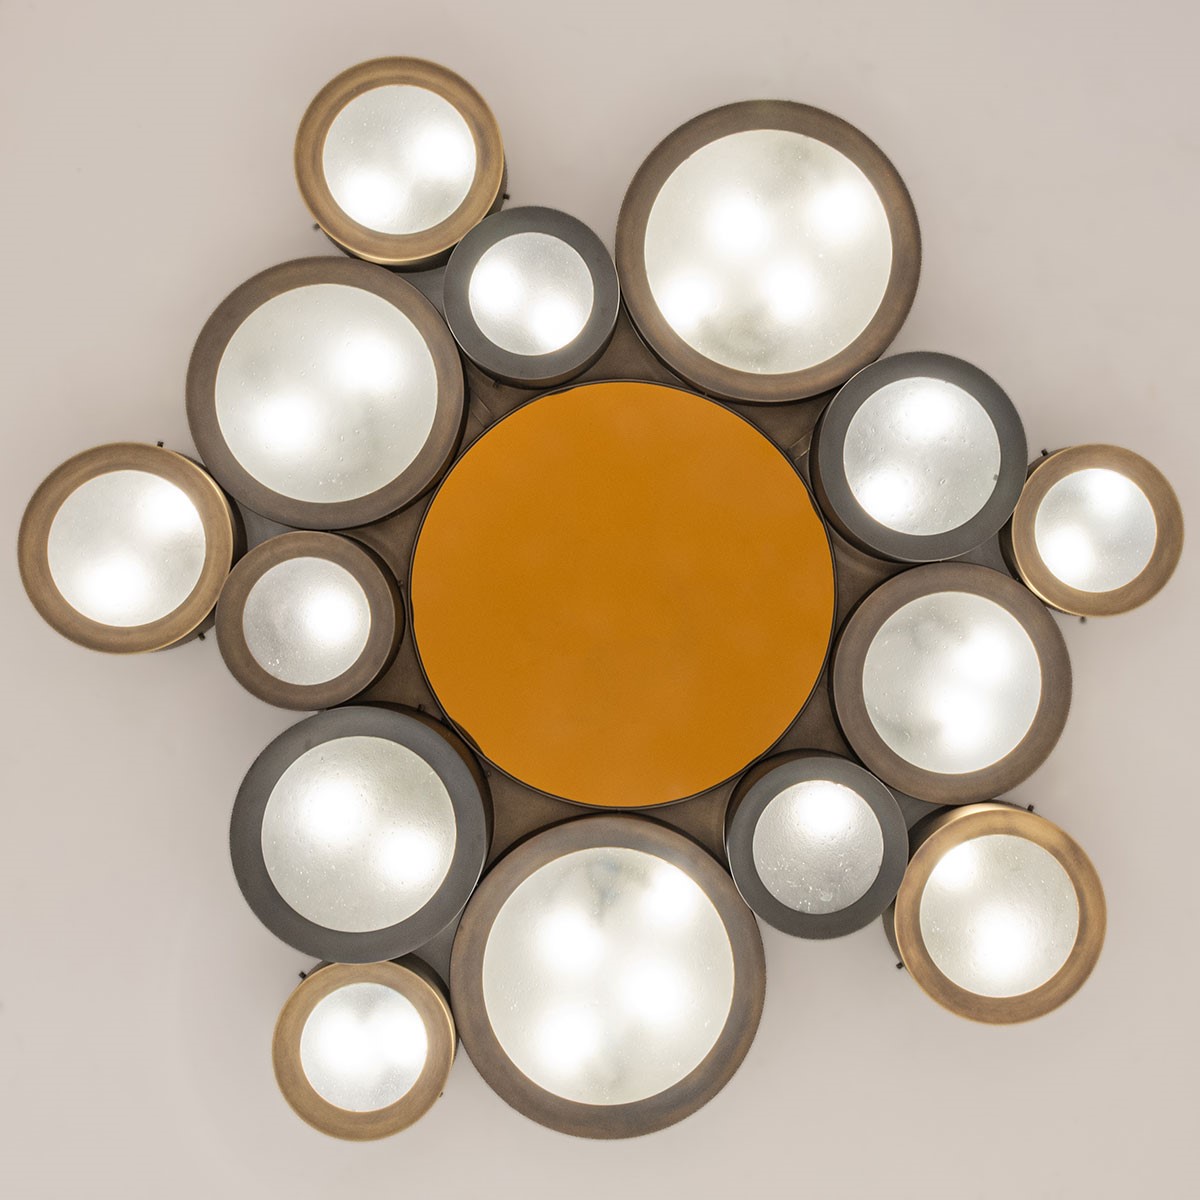 Helios Ceiling Light by form A, gaspare asaro